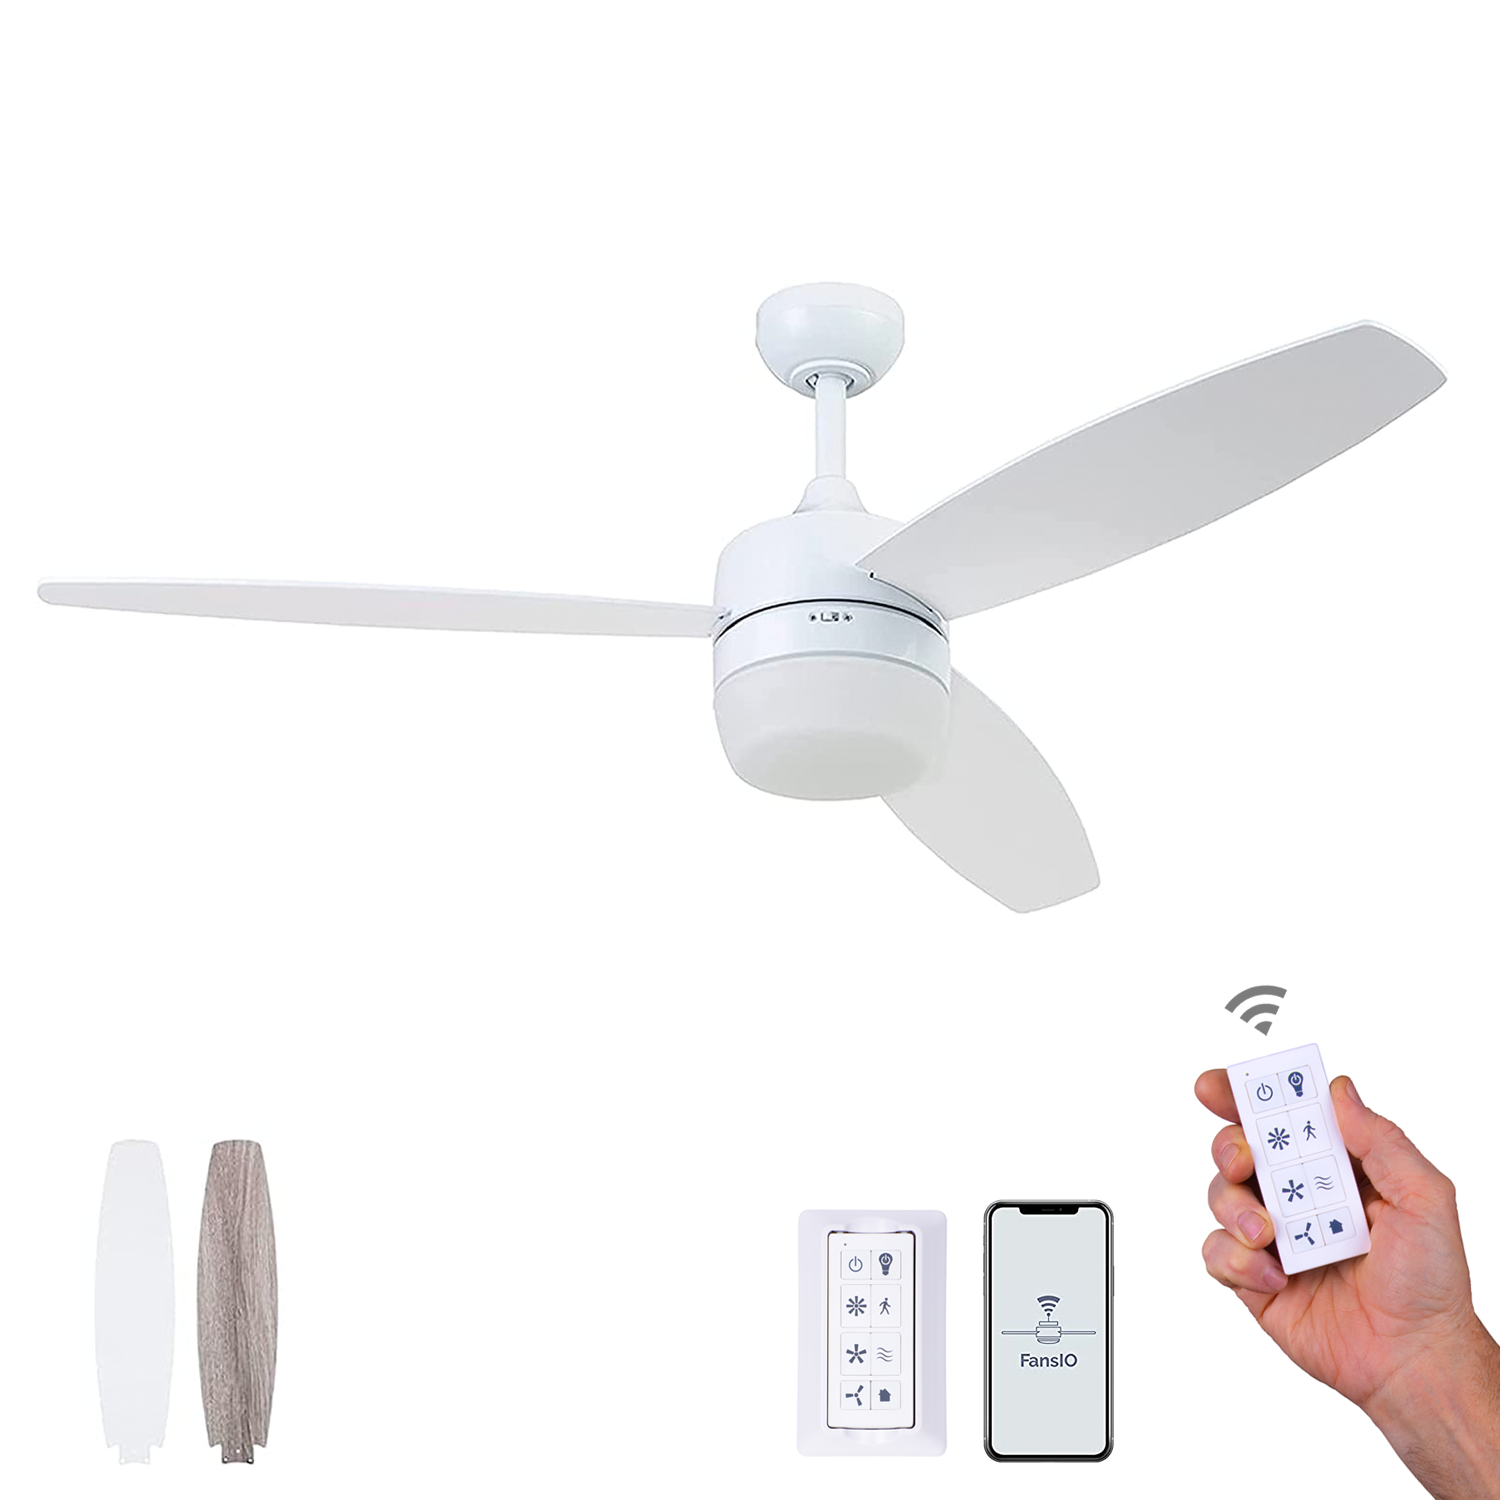 52 Inch Enoki, Bright White, Remote Control, Smart Ceiling Fan by Prominence Home